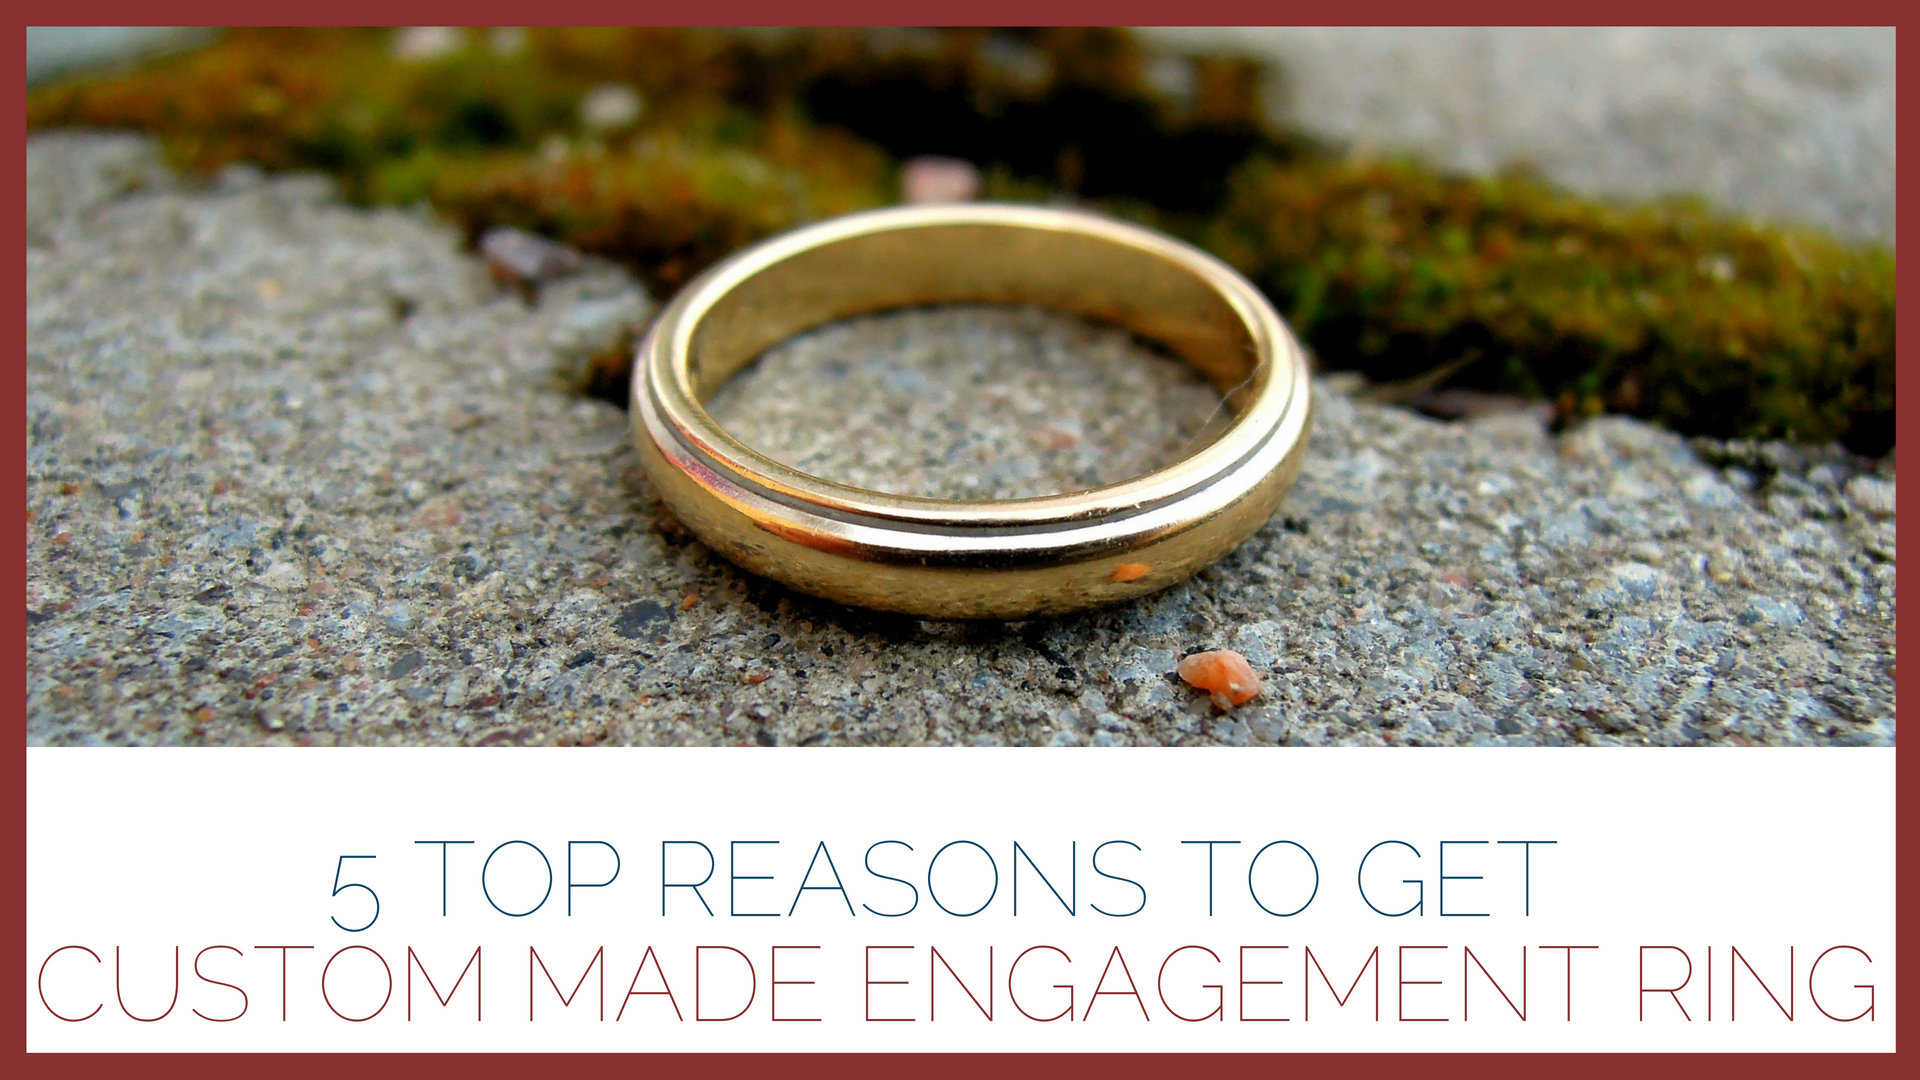 5 Top Reasons to Get Custom Made Engagement Ring